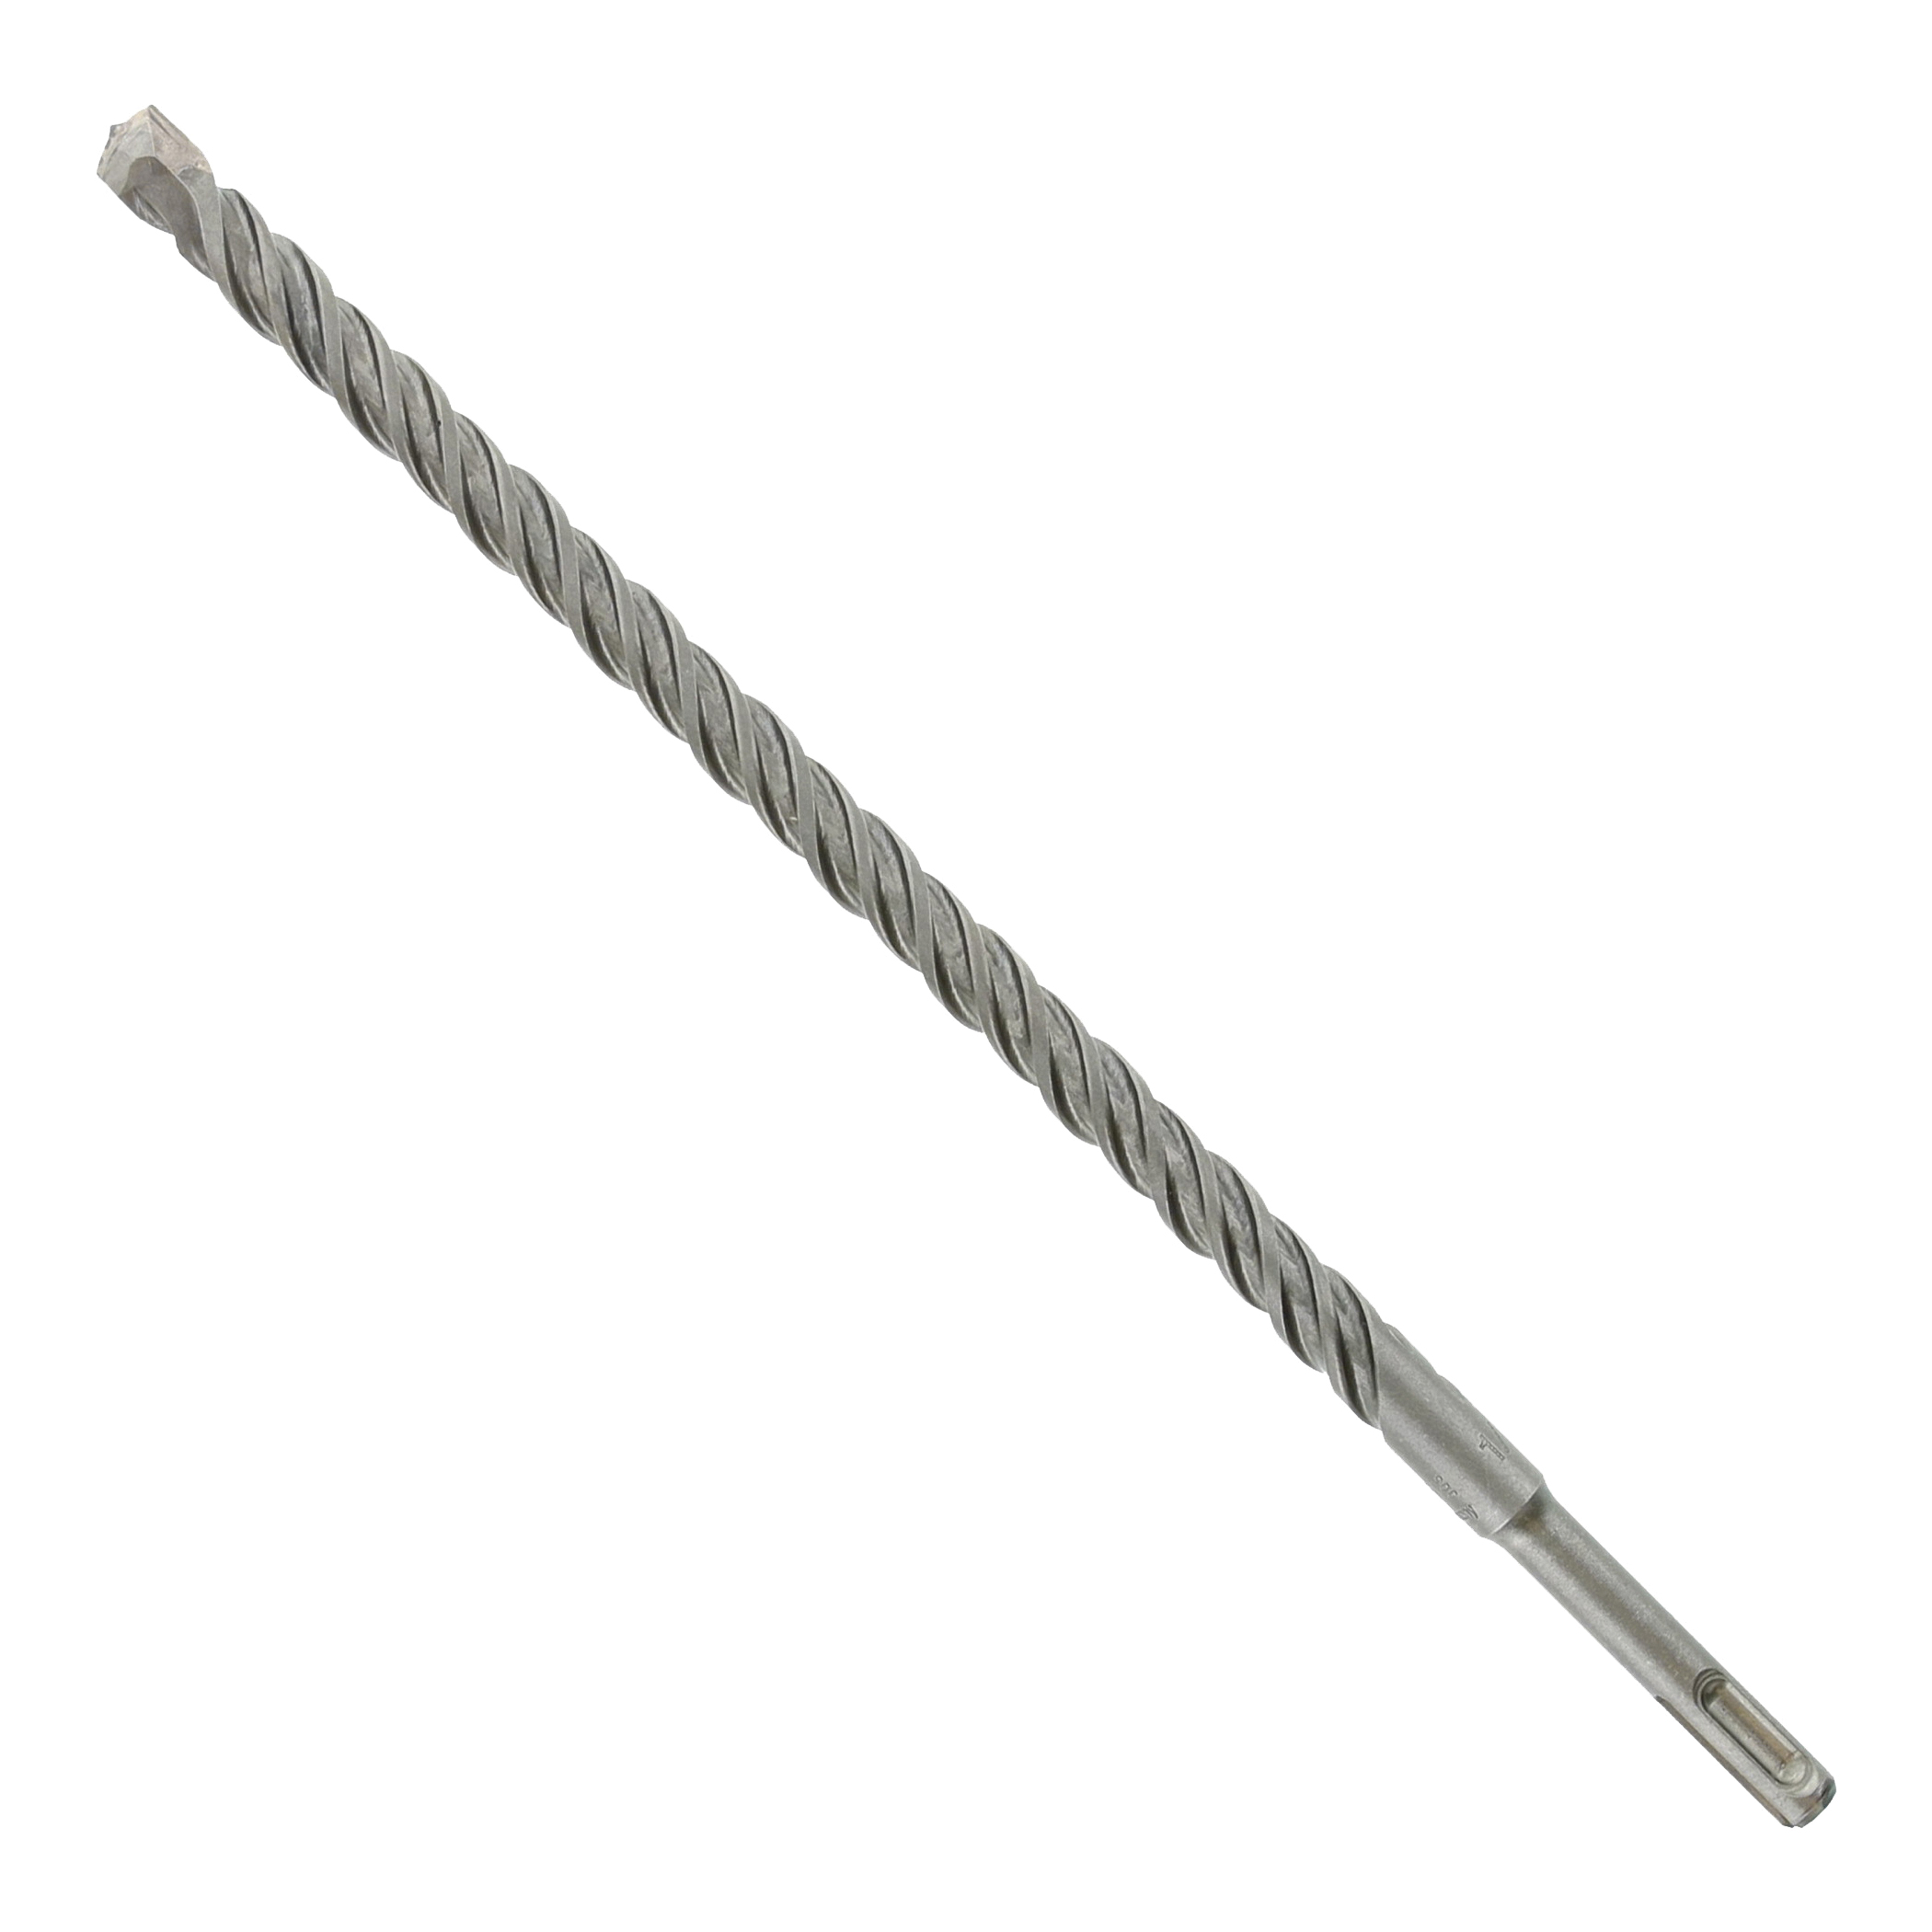 DMAPL2320 Hammer Drill Bit, 1/2 in Dia, 12 in OAL, Percussion, 4-Flute, SDS Plus Shank